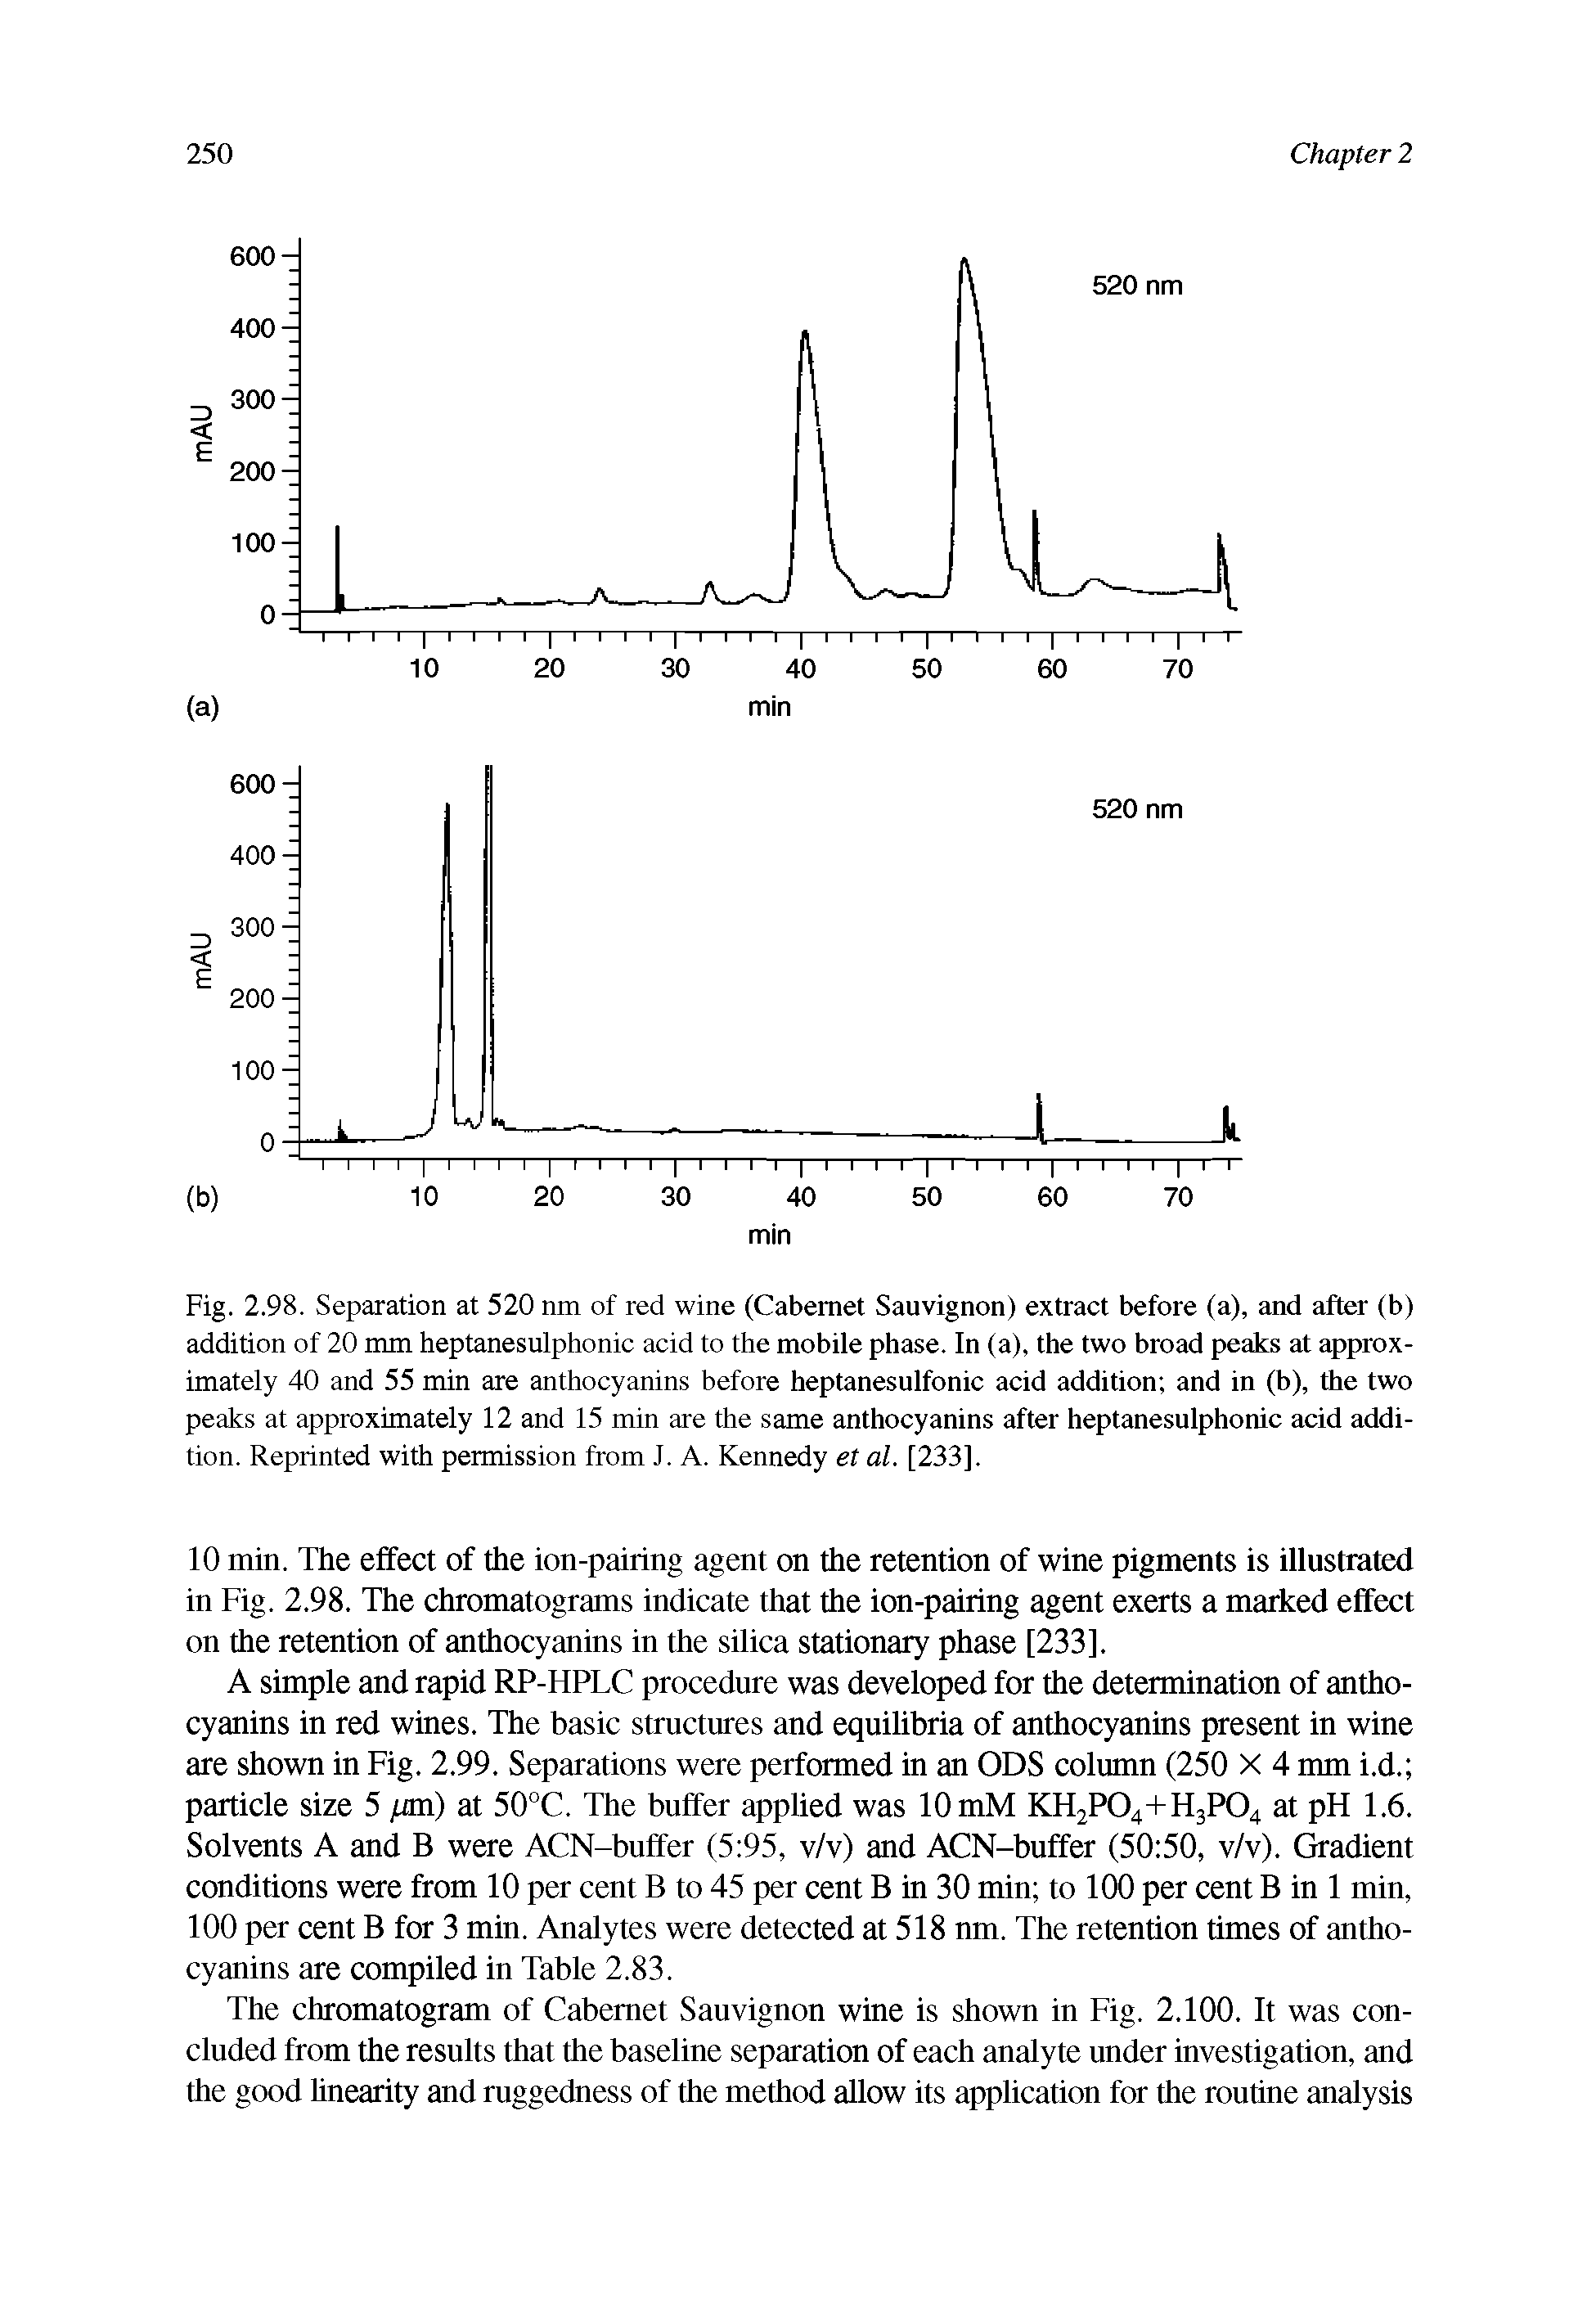 Fig. 2.98. Separation at 520 nm of red wine (Cabernet Sauvignon) extract before (a), and after (b) addition of 20 mm heptanesulphonic acid to the mobile phase. In (a), the two broad peaks at approximately 40 and 55 min are anthocyanins before heptanesulfonic acid addition and in (b), the two peaks at approximately 12 and 15 min are the same anthocyanins after heptanesulphonic acid addition. Reprinted with permission from J. A. Kennedy et al. [233].